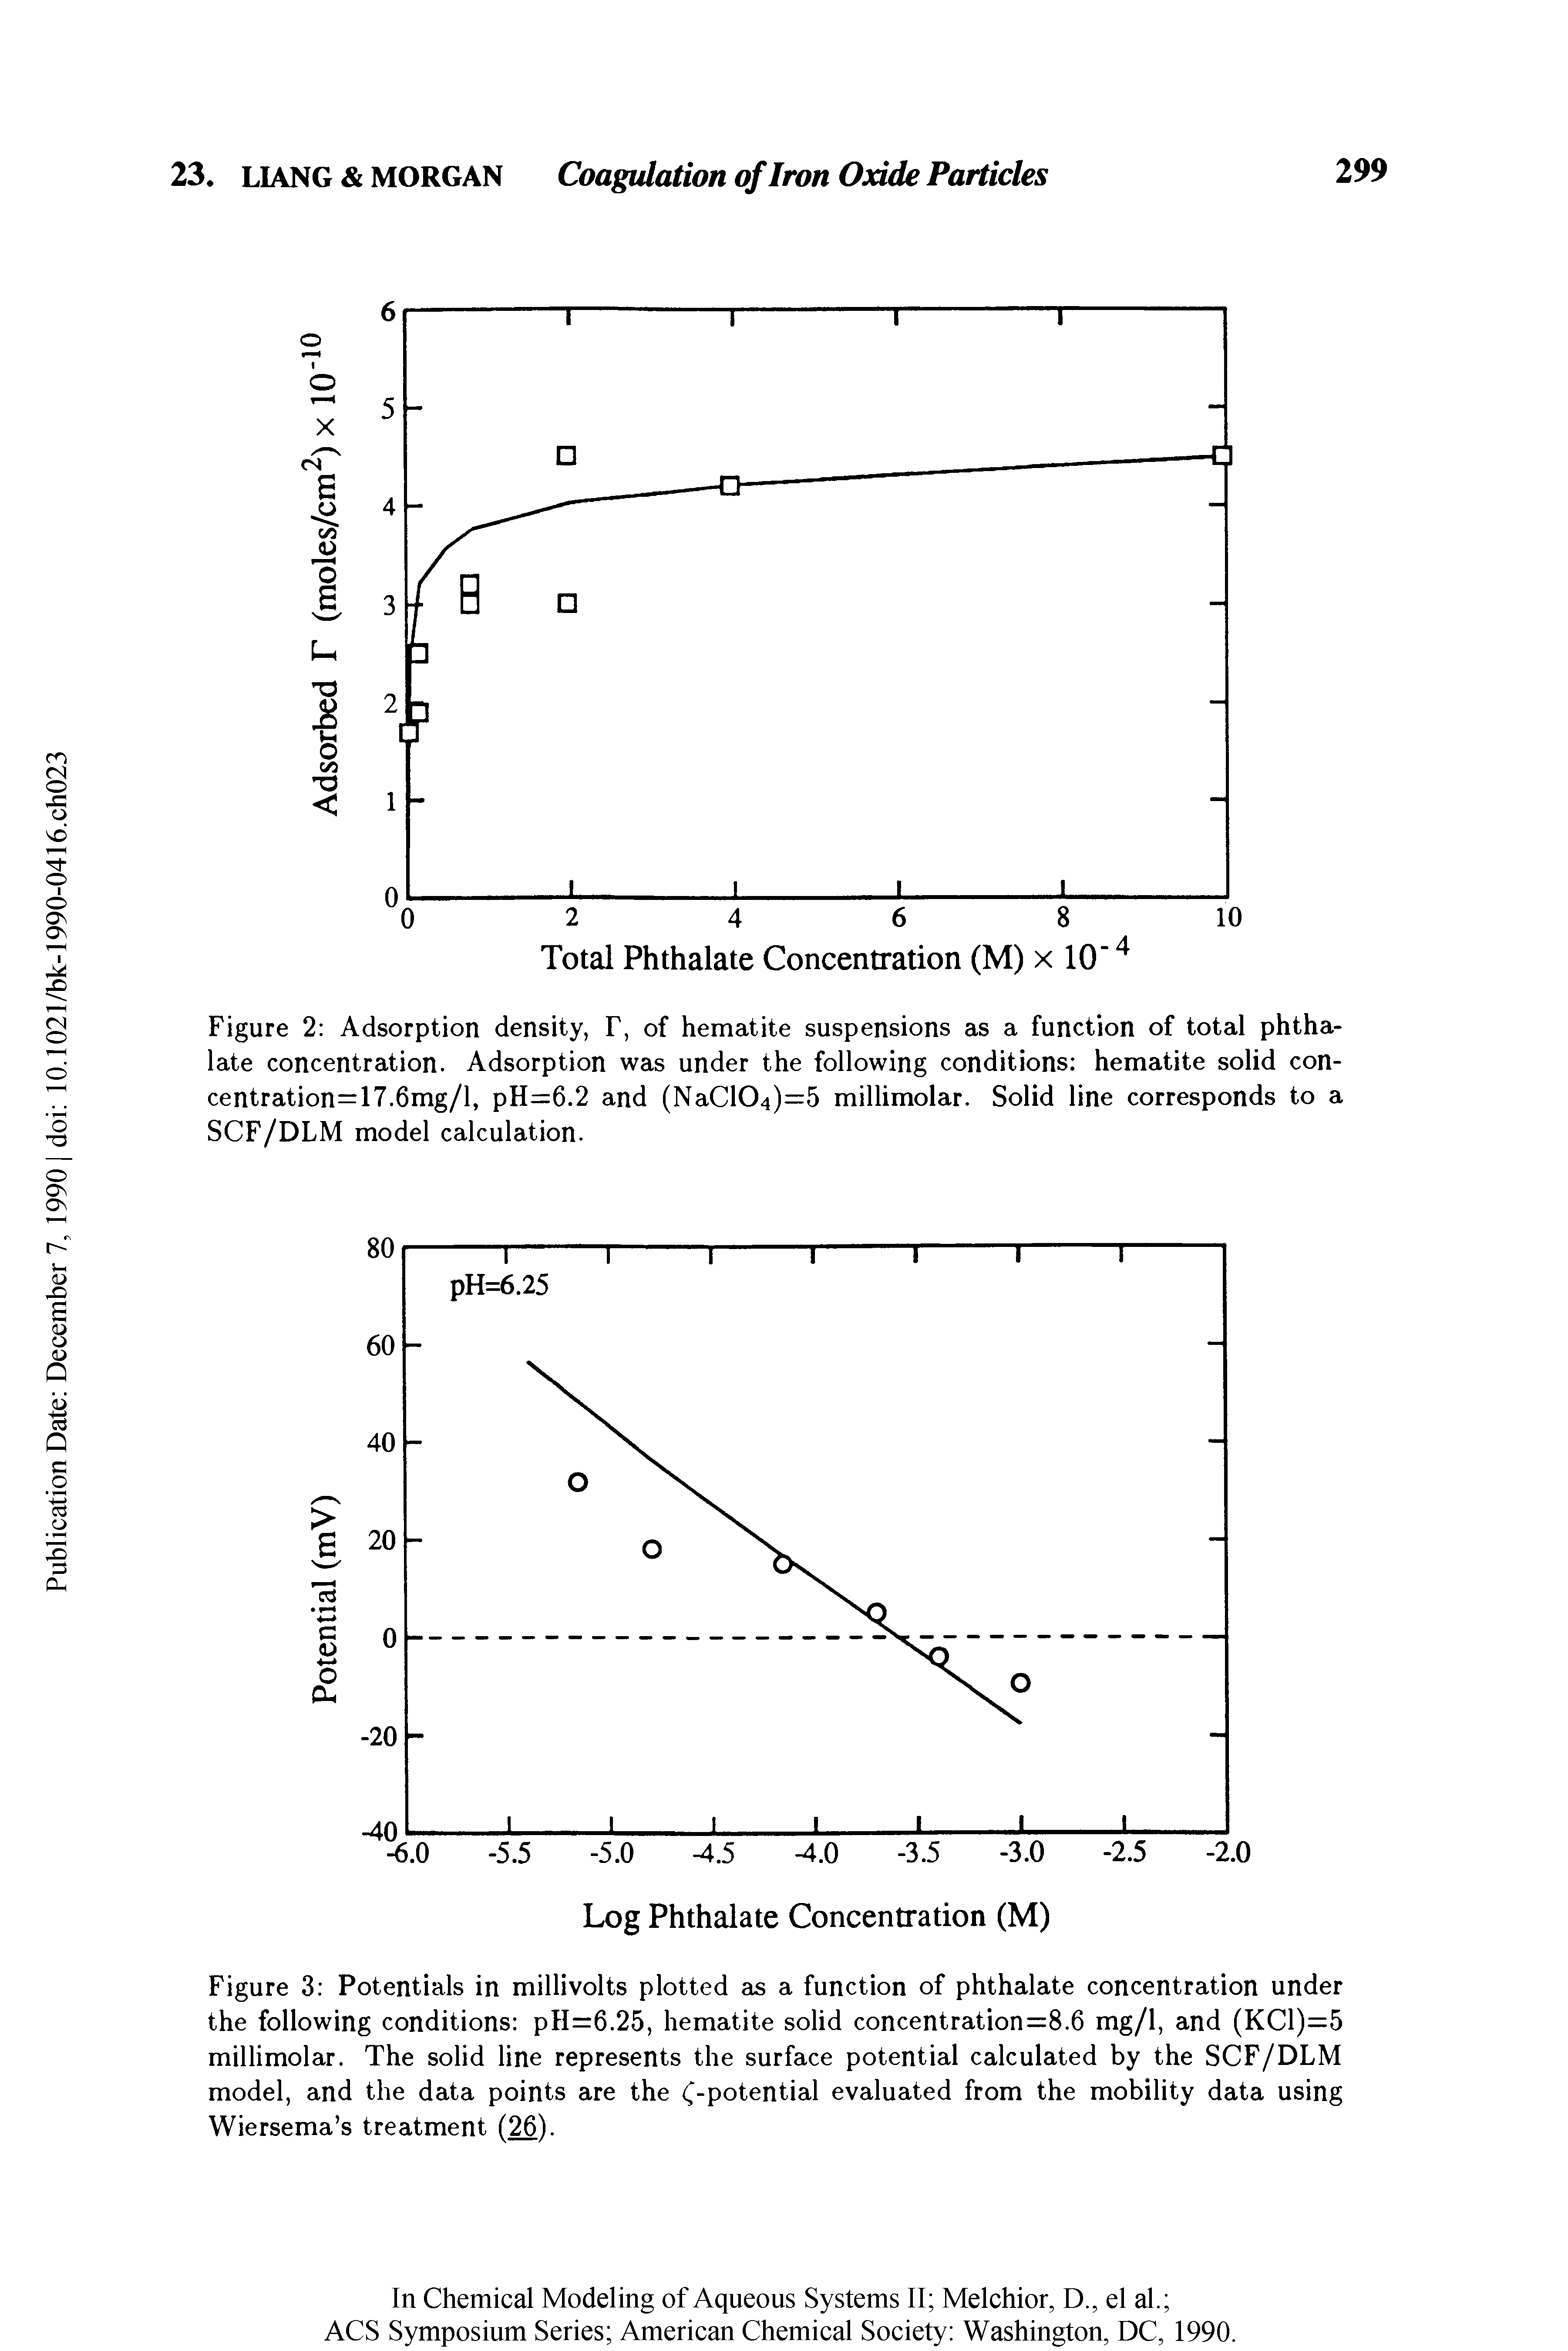 Figure 2 Adsorption density, F, of hematite suspensions as a function of total phtha-late concentration. Adsorption was under the following conditions hematite solid con-centration=17.6mg/l, pH=6.2 and (NaC104)= 5 millimolar. Solid line corresponds to a SCF/DLM model calculation.